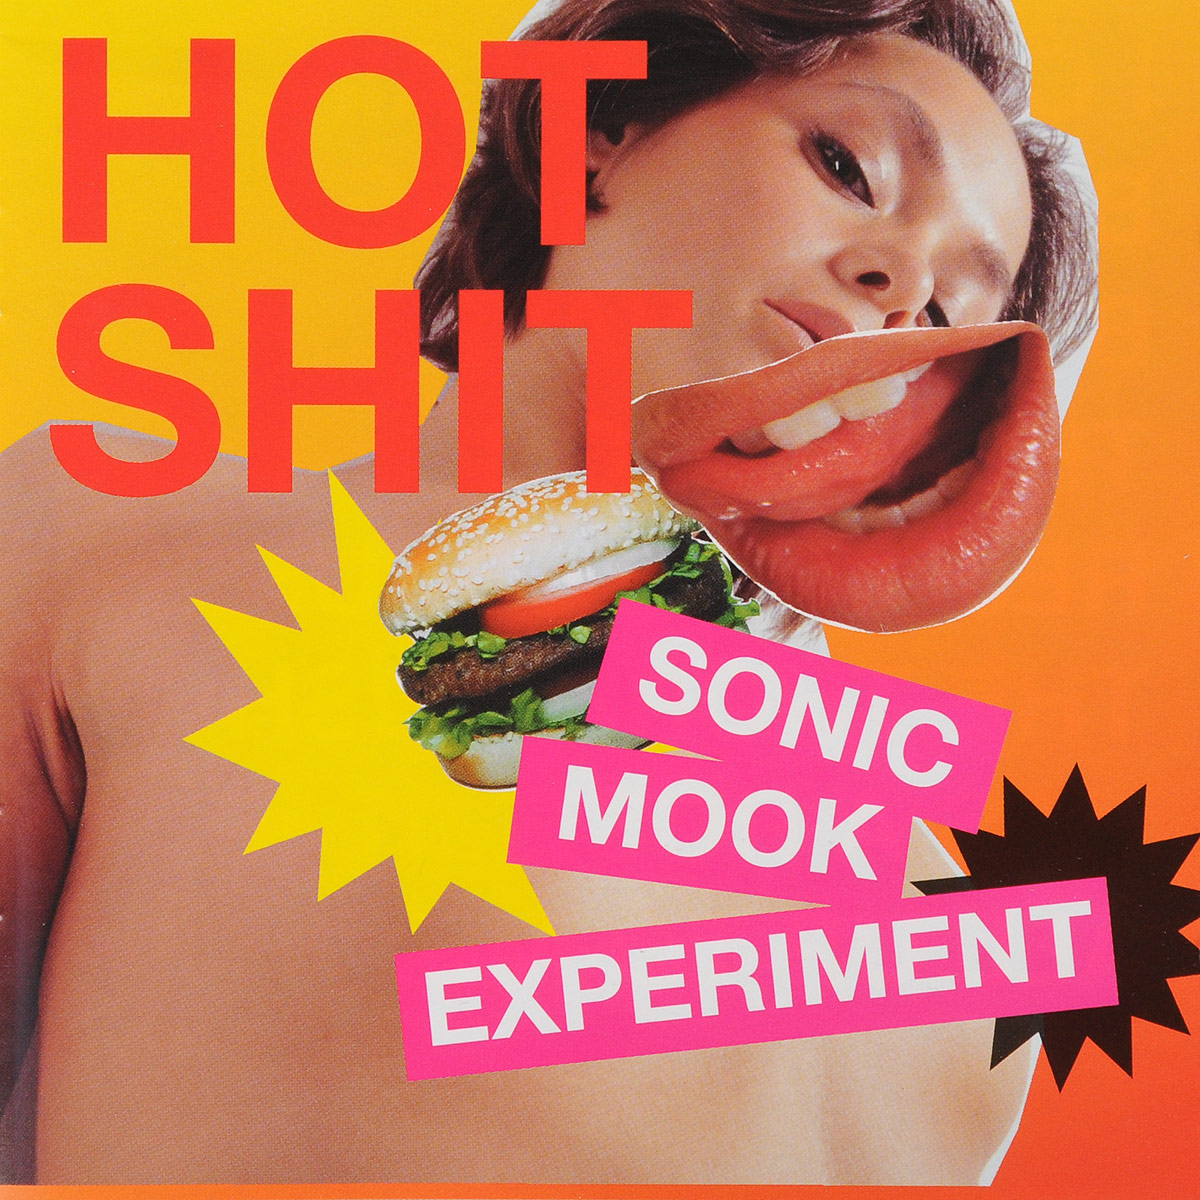 VARIOUS ARTISTS. SONIC MOOK 3: HOT SHIT